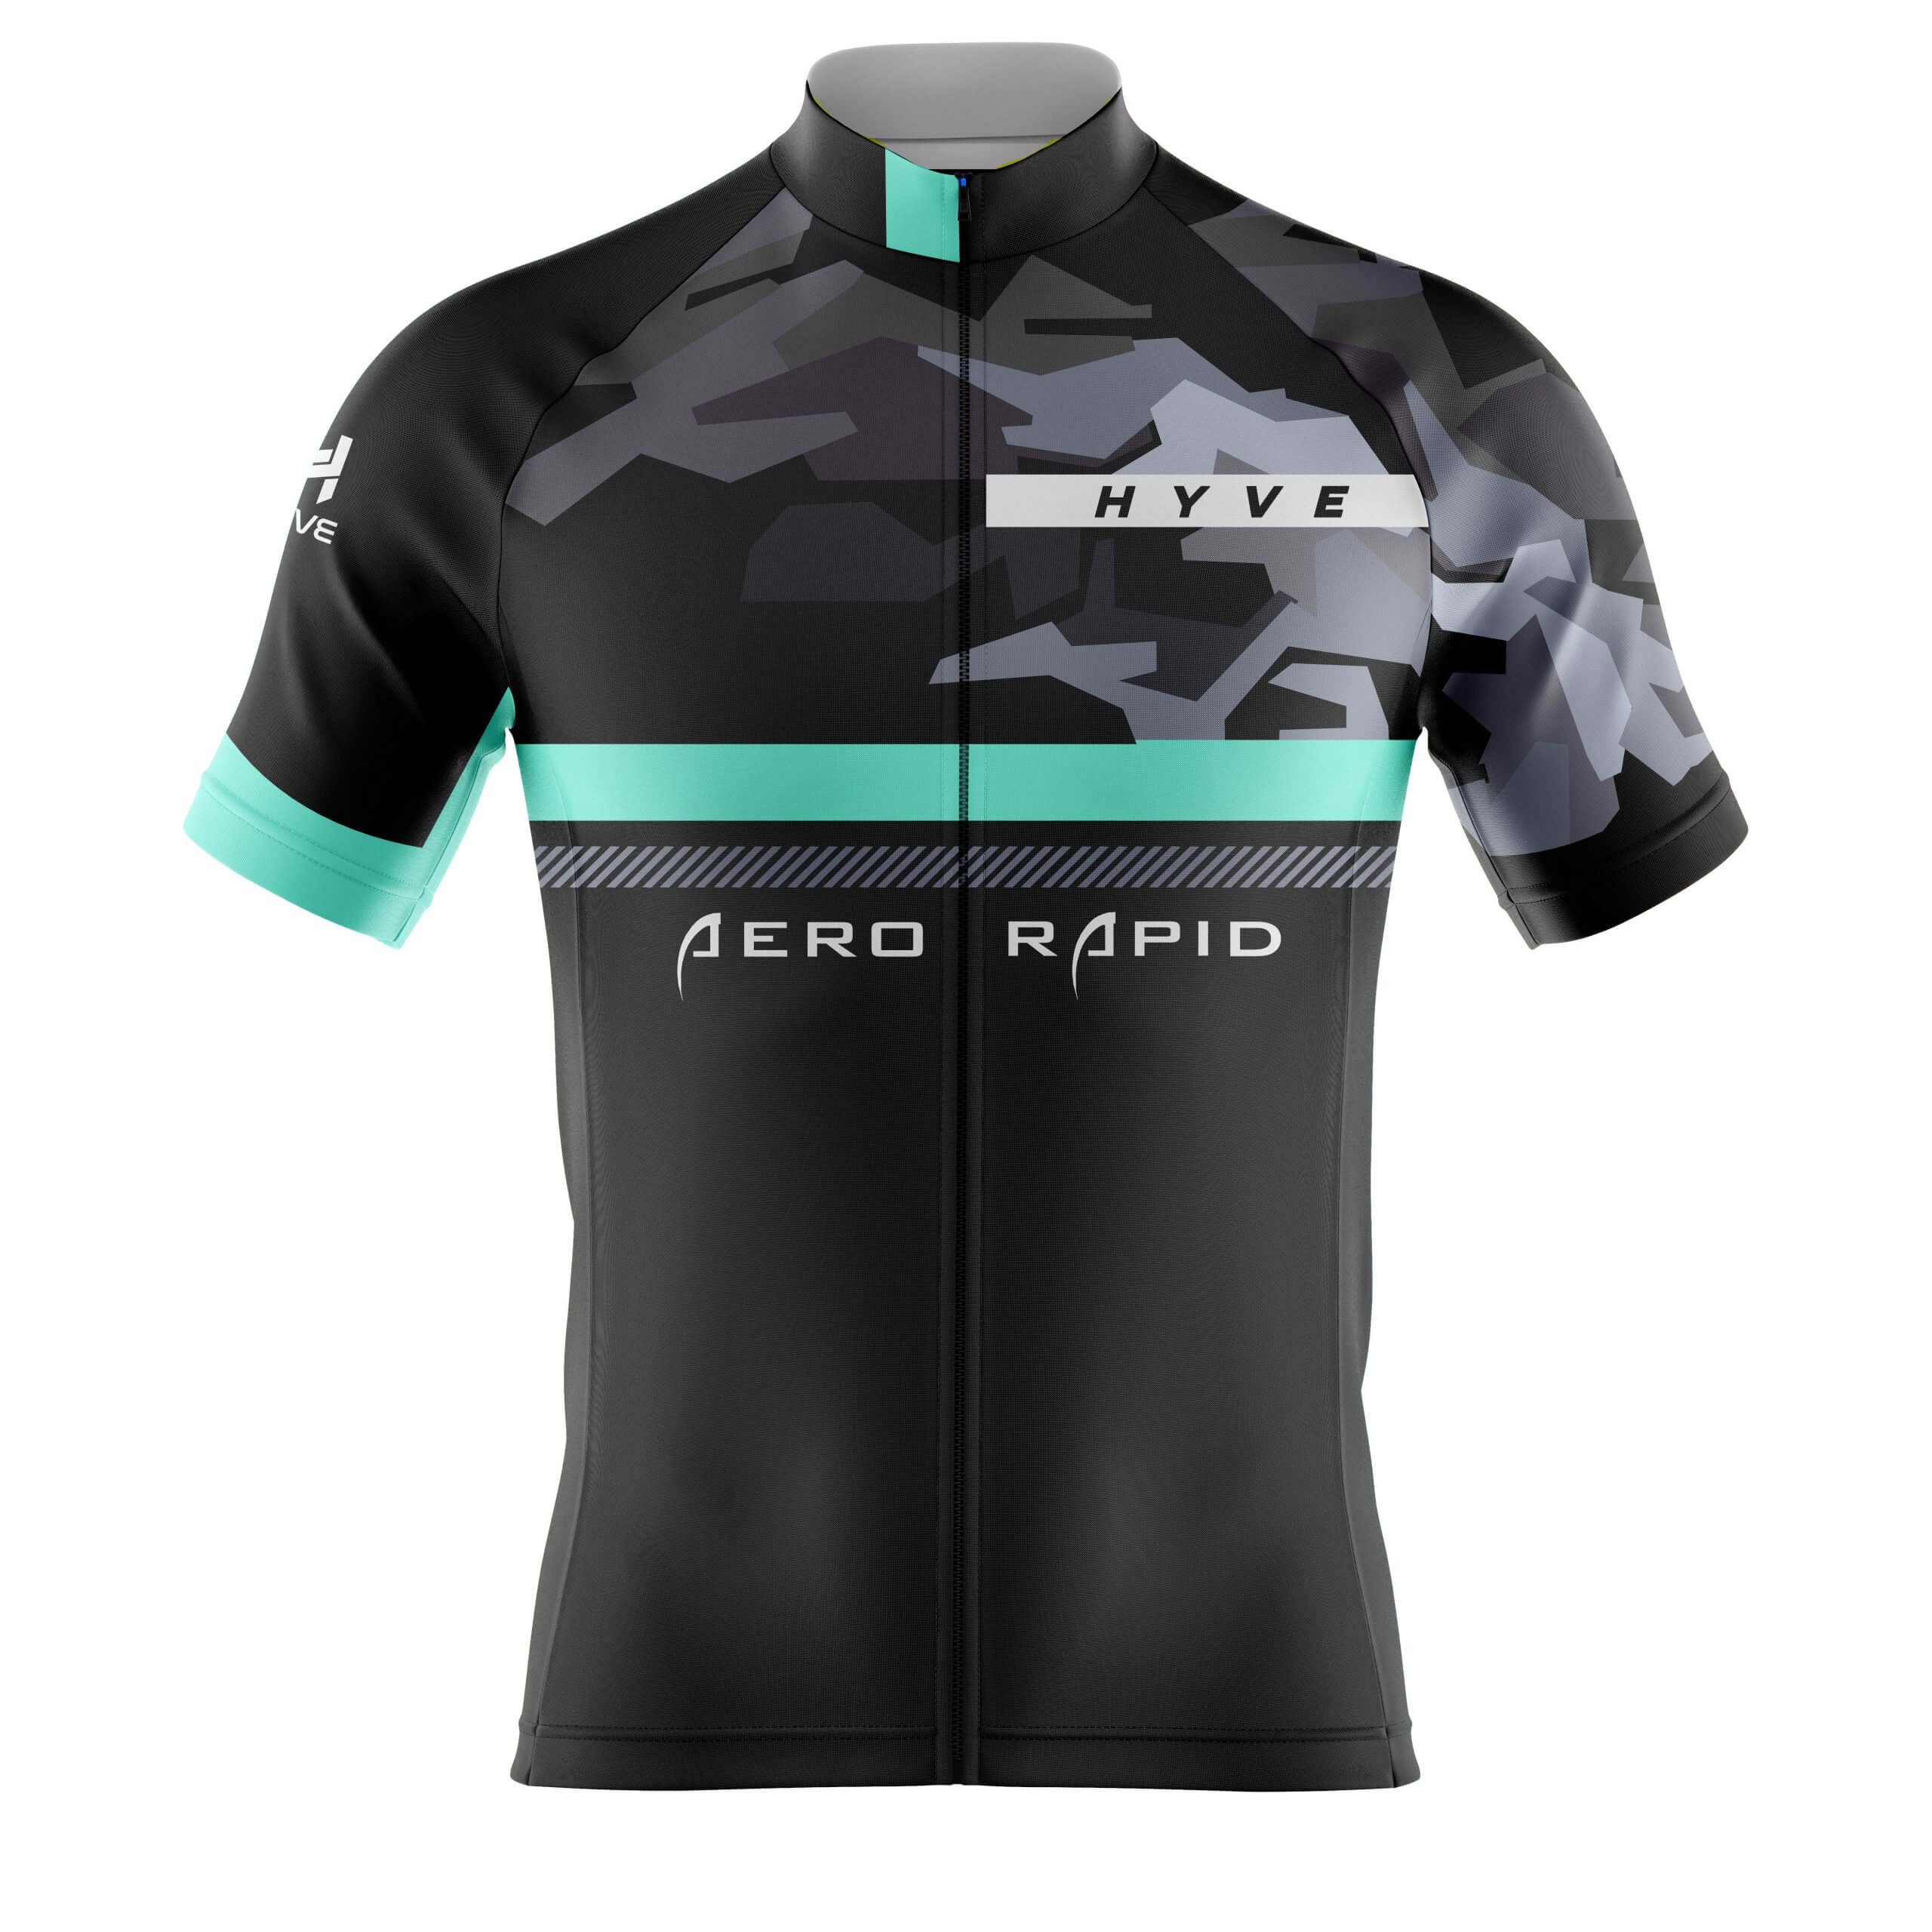 Hyve Rock Beach Aero Rapid Custom Cycle Riding Jersey for Men - Front